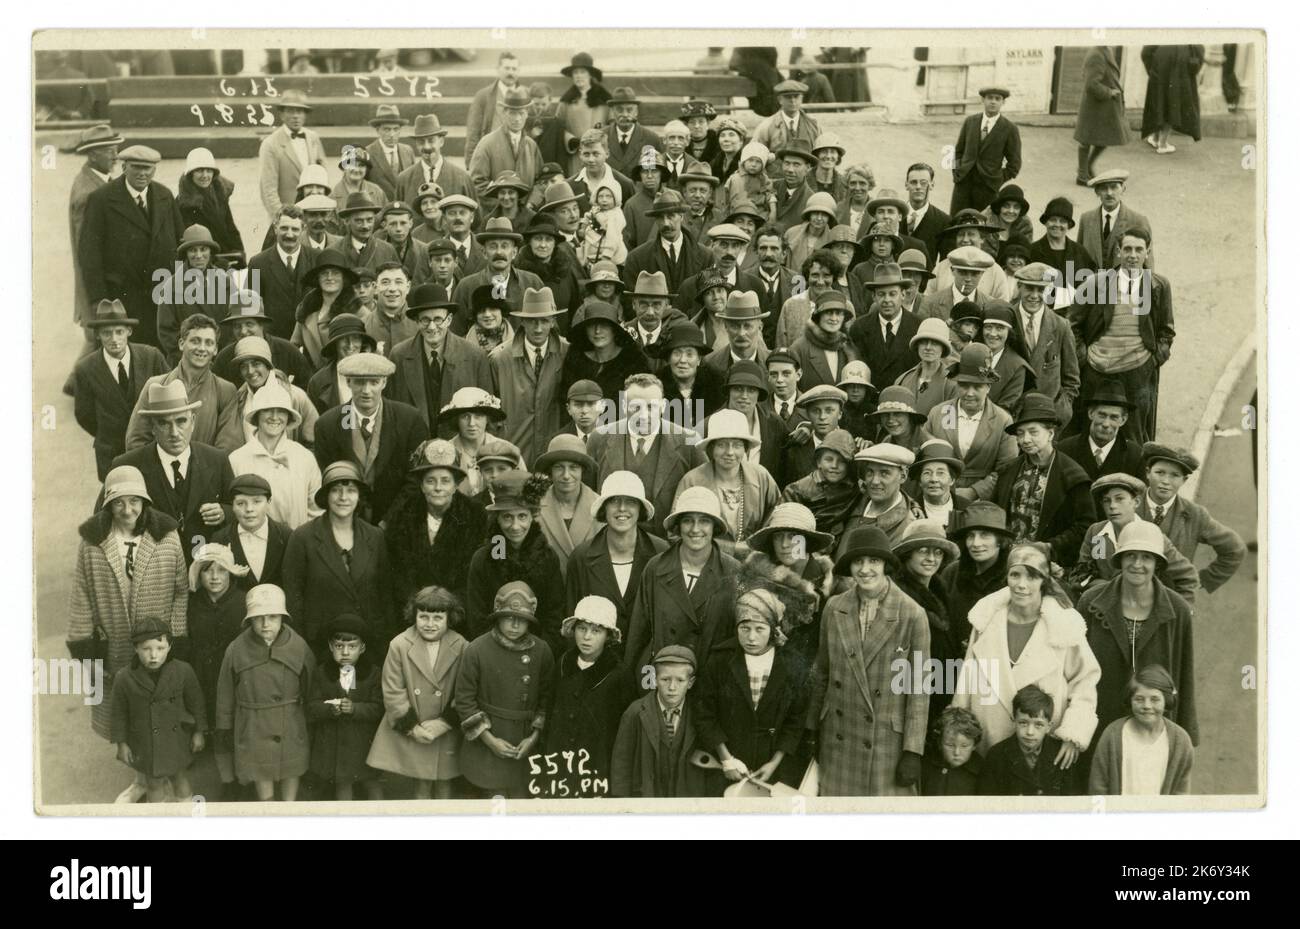 Original 1920's era postcard of large crowd at the seaside, photographed by the pier. published by B.B. Photo series dated 9 August 1925 6.16pm, printed on front. Some characters, lots of fashions, including  lady's cloche hats and men's homburg hats and flat caps. Bournemouth, England, UK. Retro seaside photo. Stock Photo